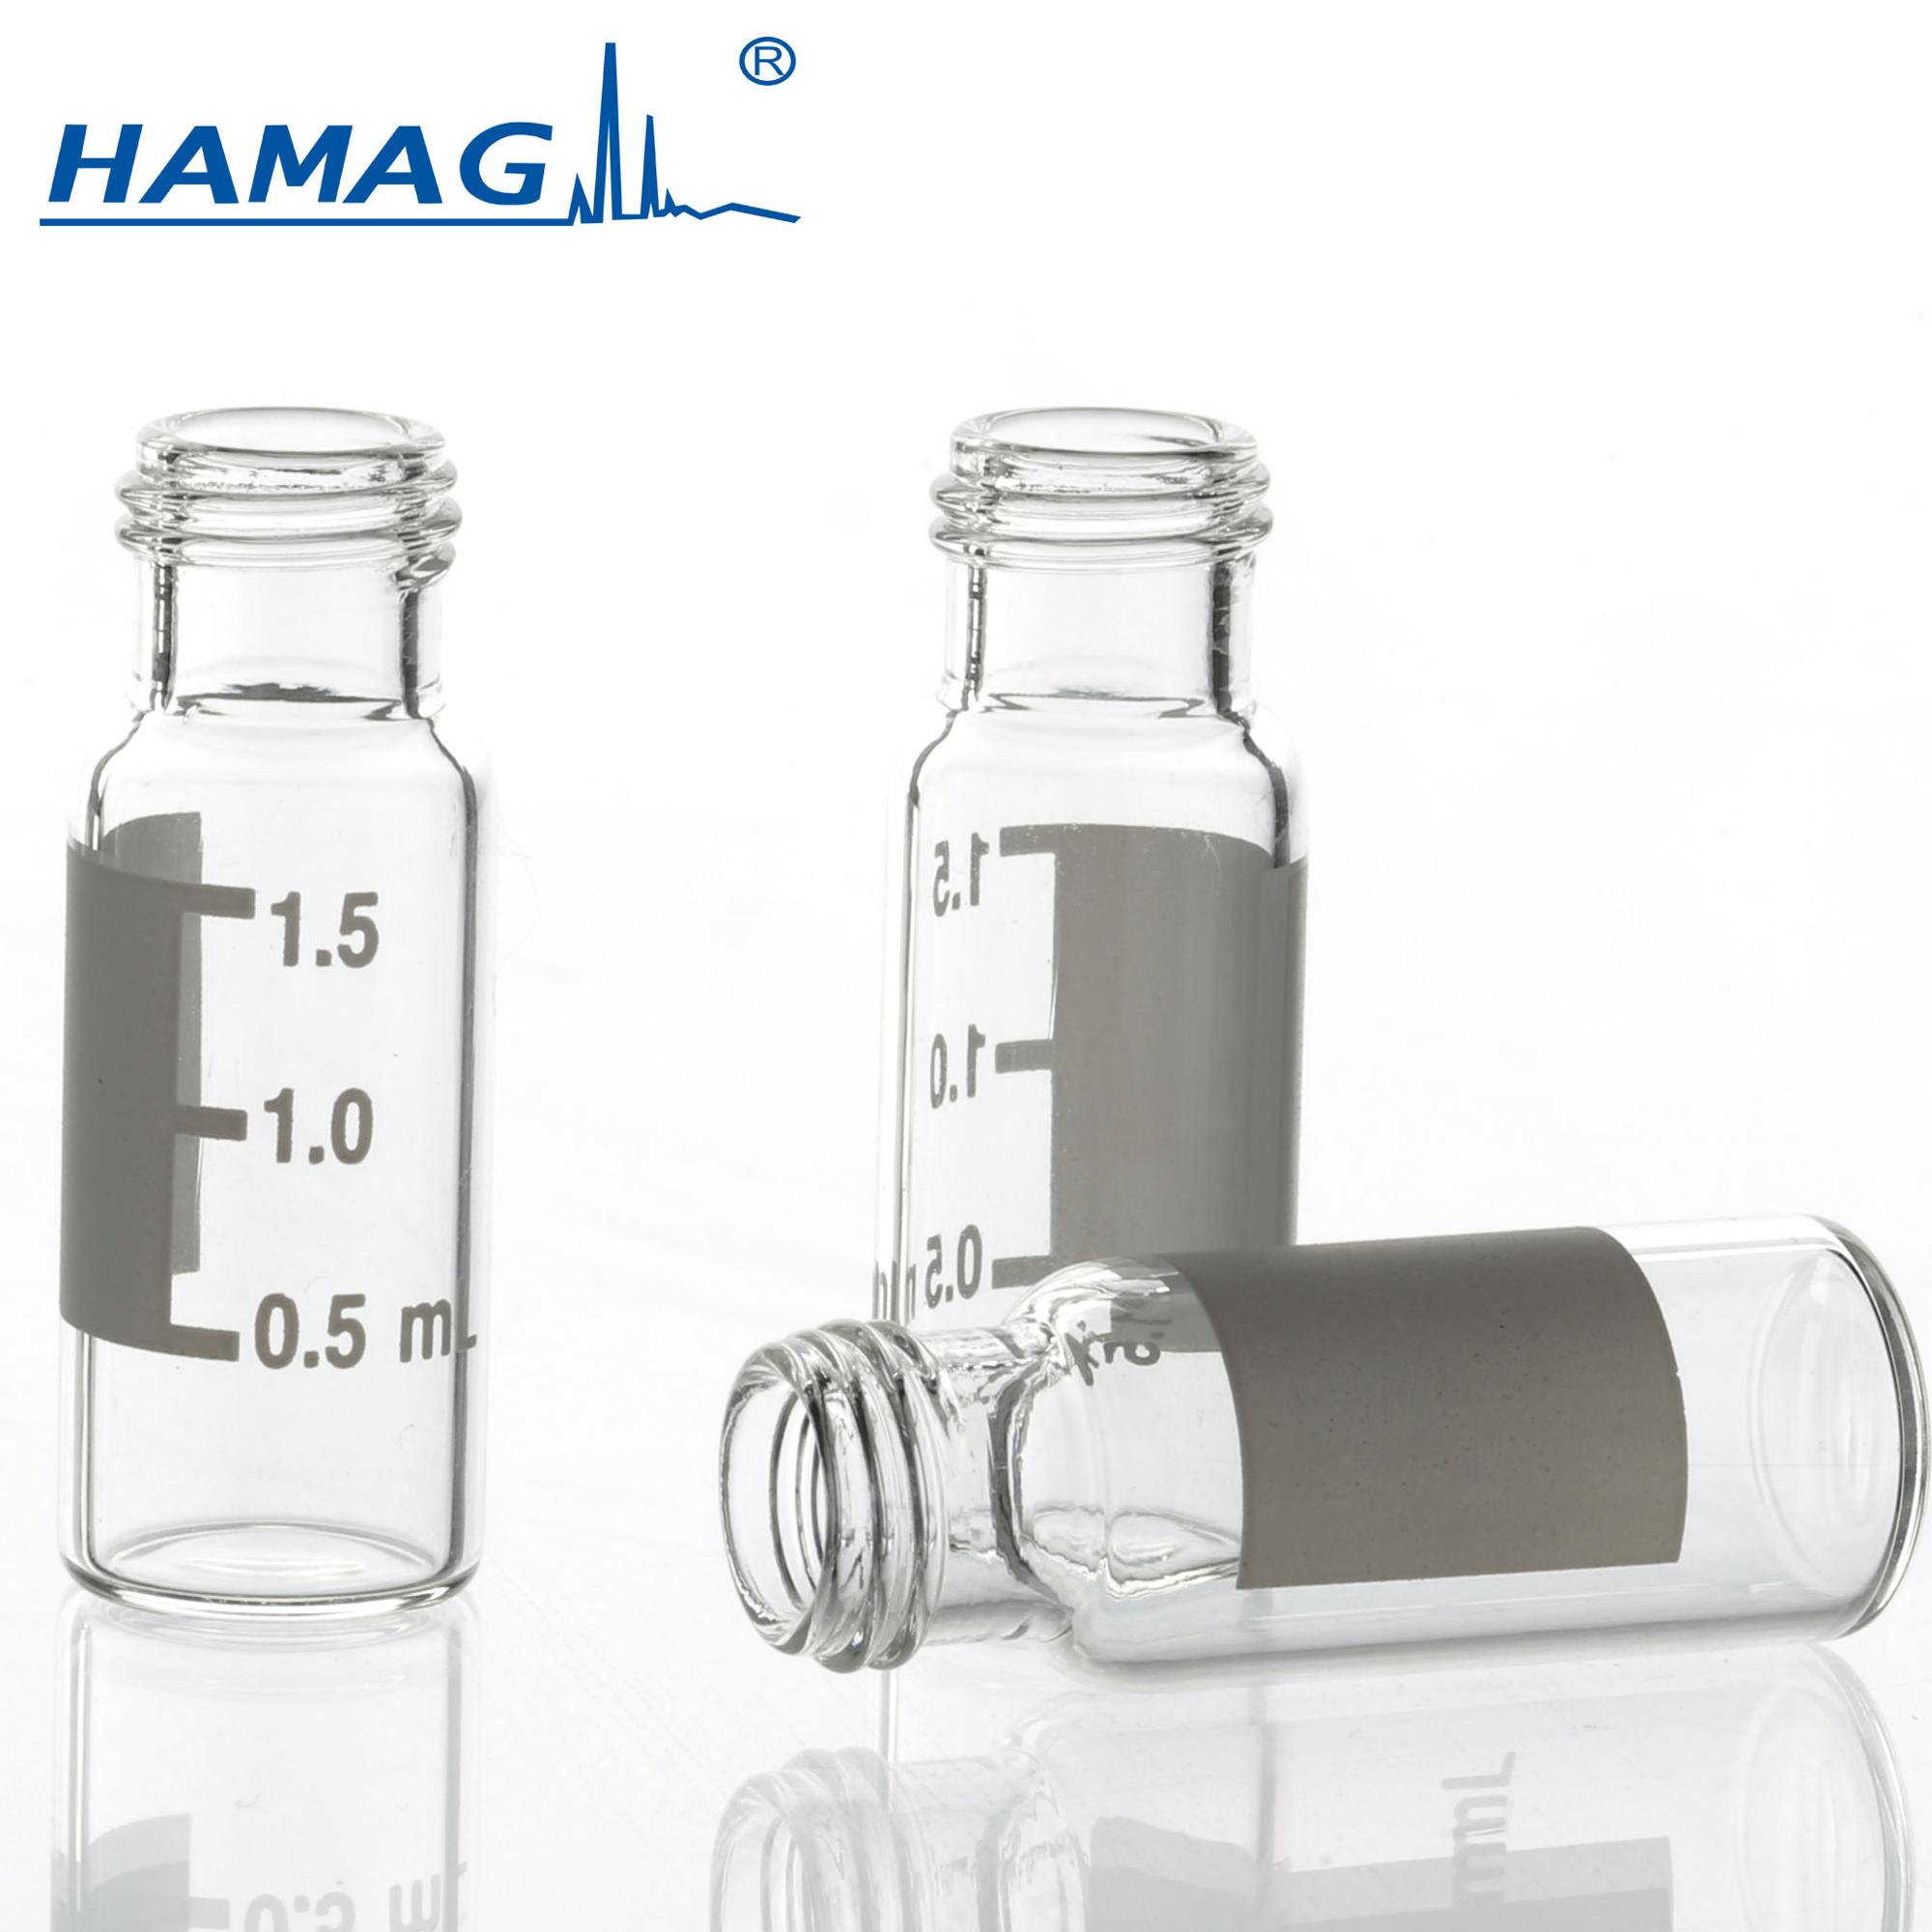 Global Vials Market is Expected to Grow at a CAGR of 6.8%